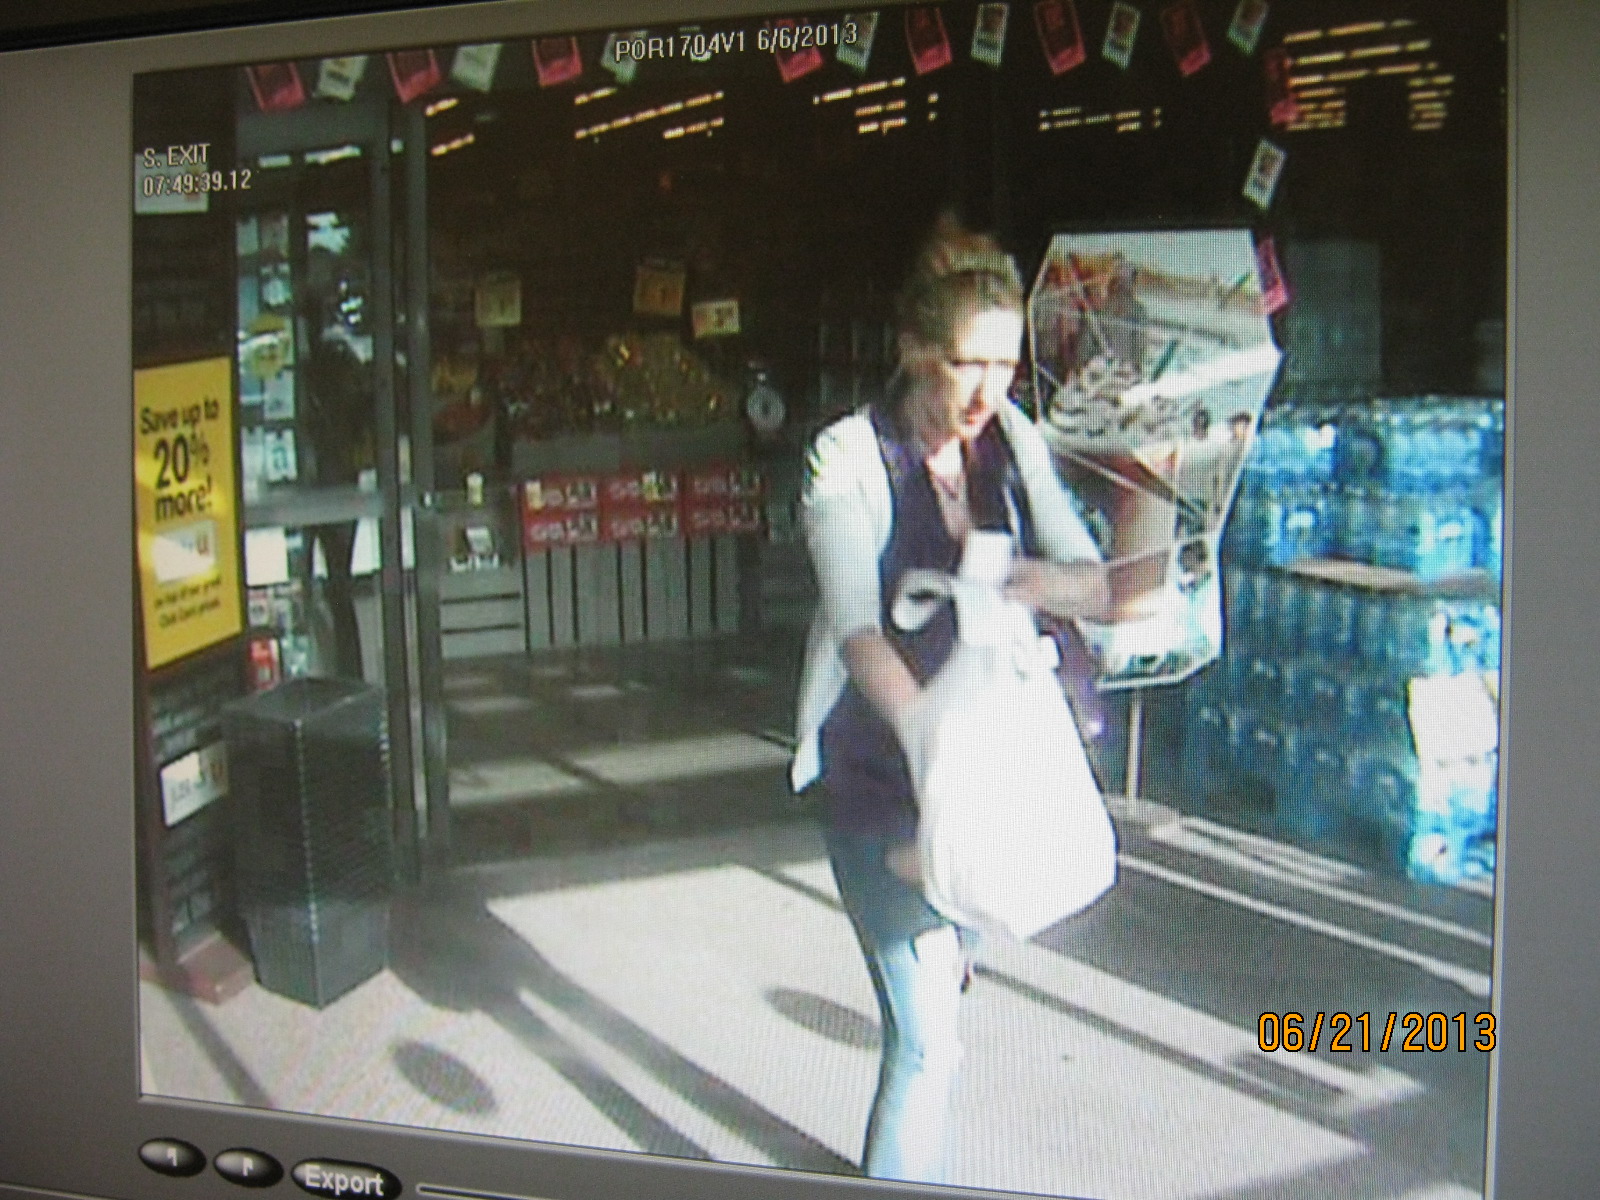 Anyone who recognizes this woman is asked to call Deputy Robin Yakhour at 360-397-6008 ext.